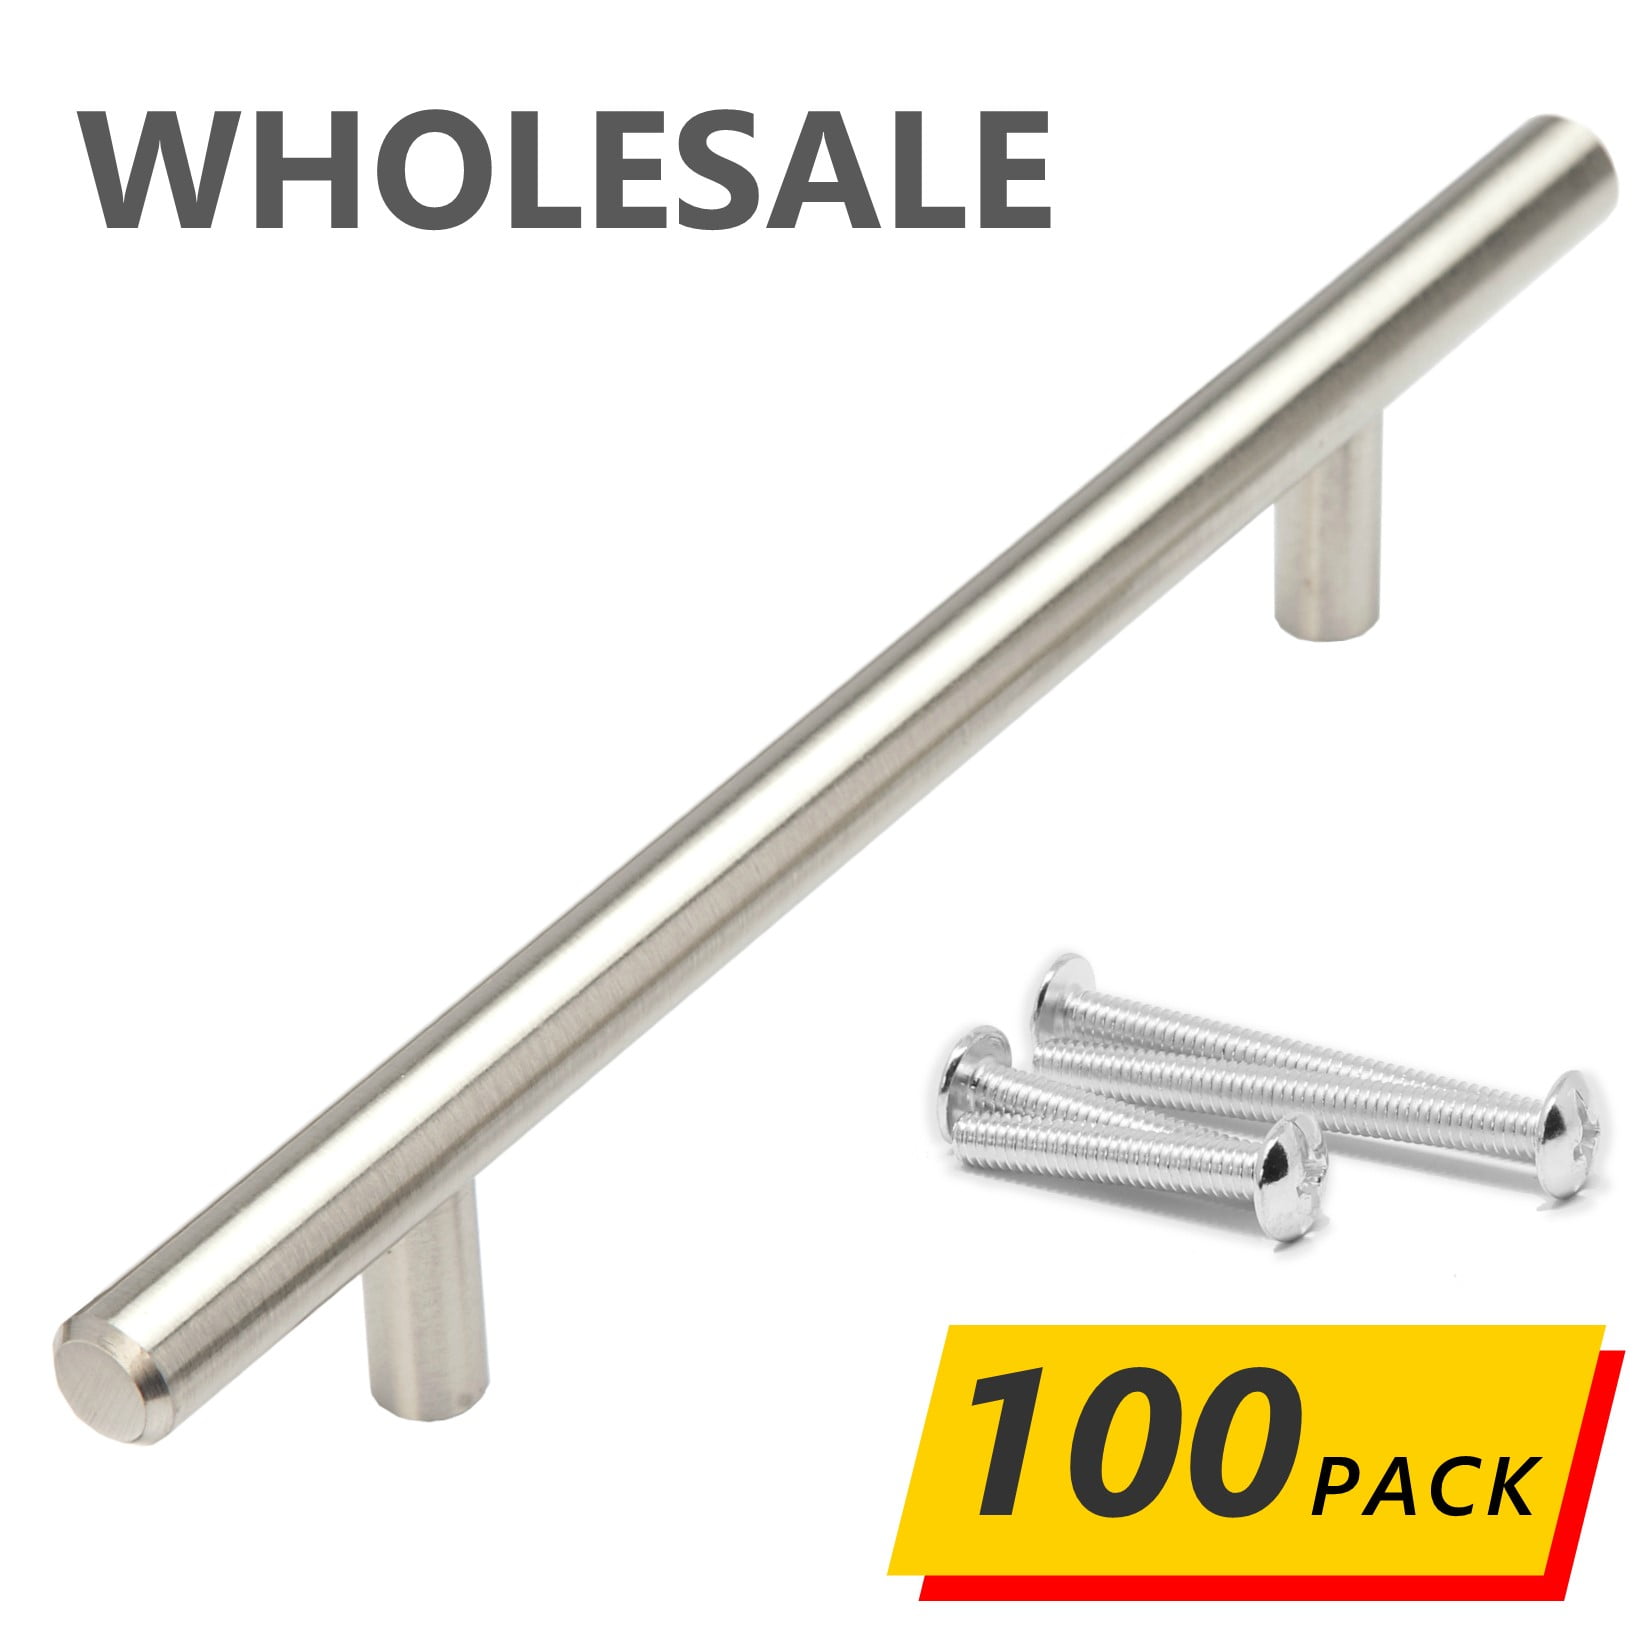 100 Pack 8" Stainless Steel T Bar Pulls 5 Inch Hole Center